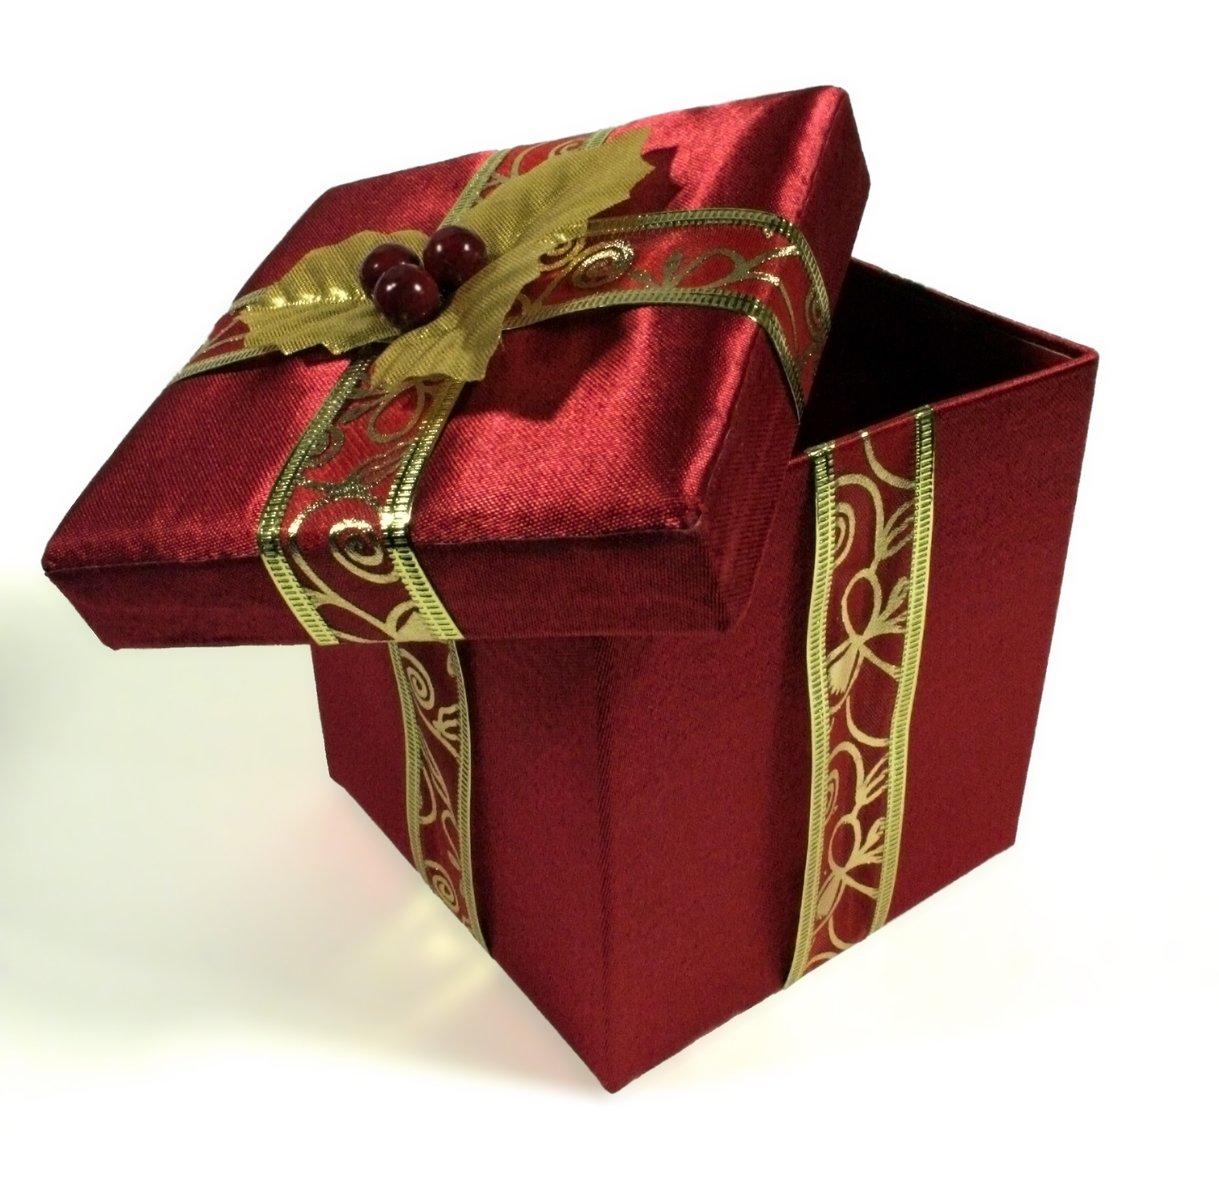 an elegant red box wrapped in gold with a ribbon and on